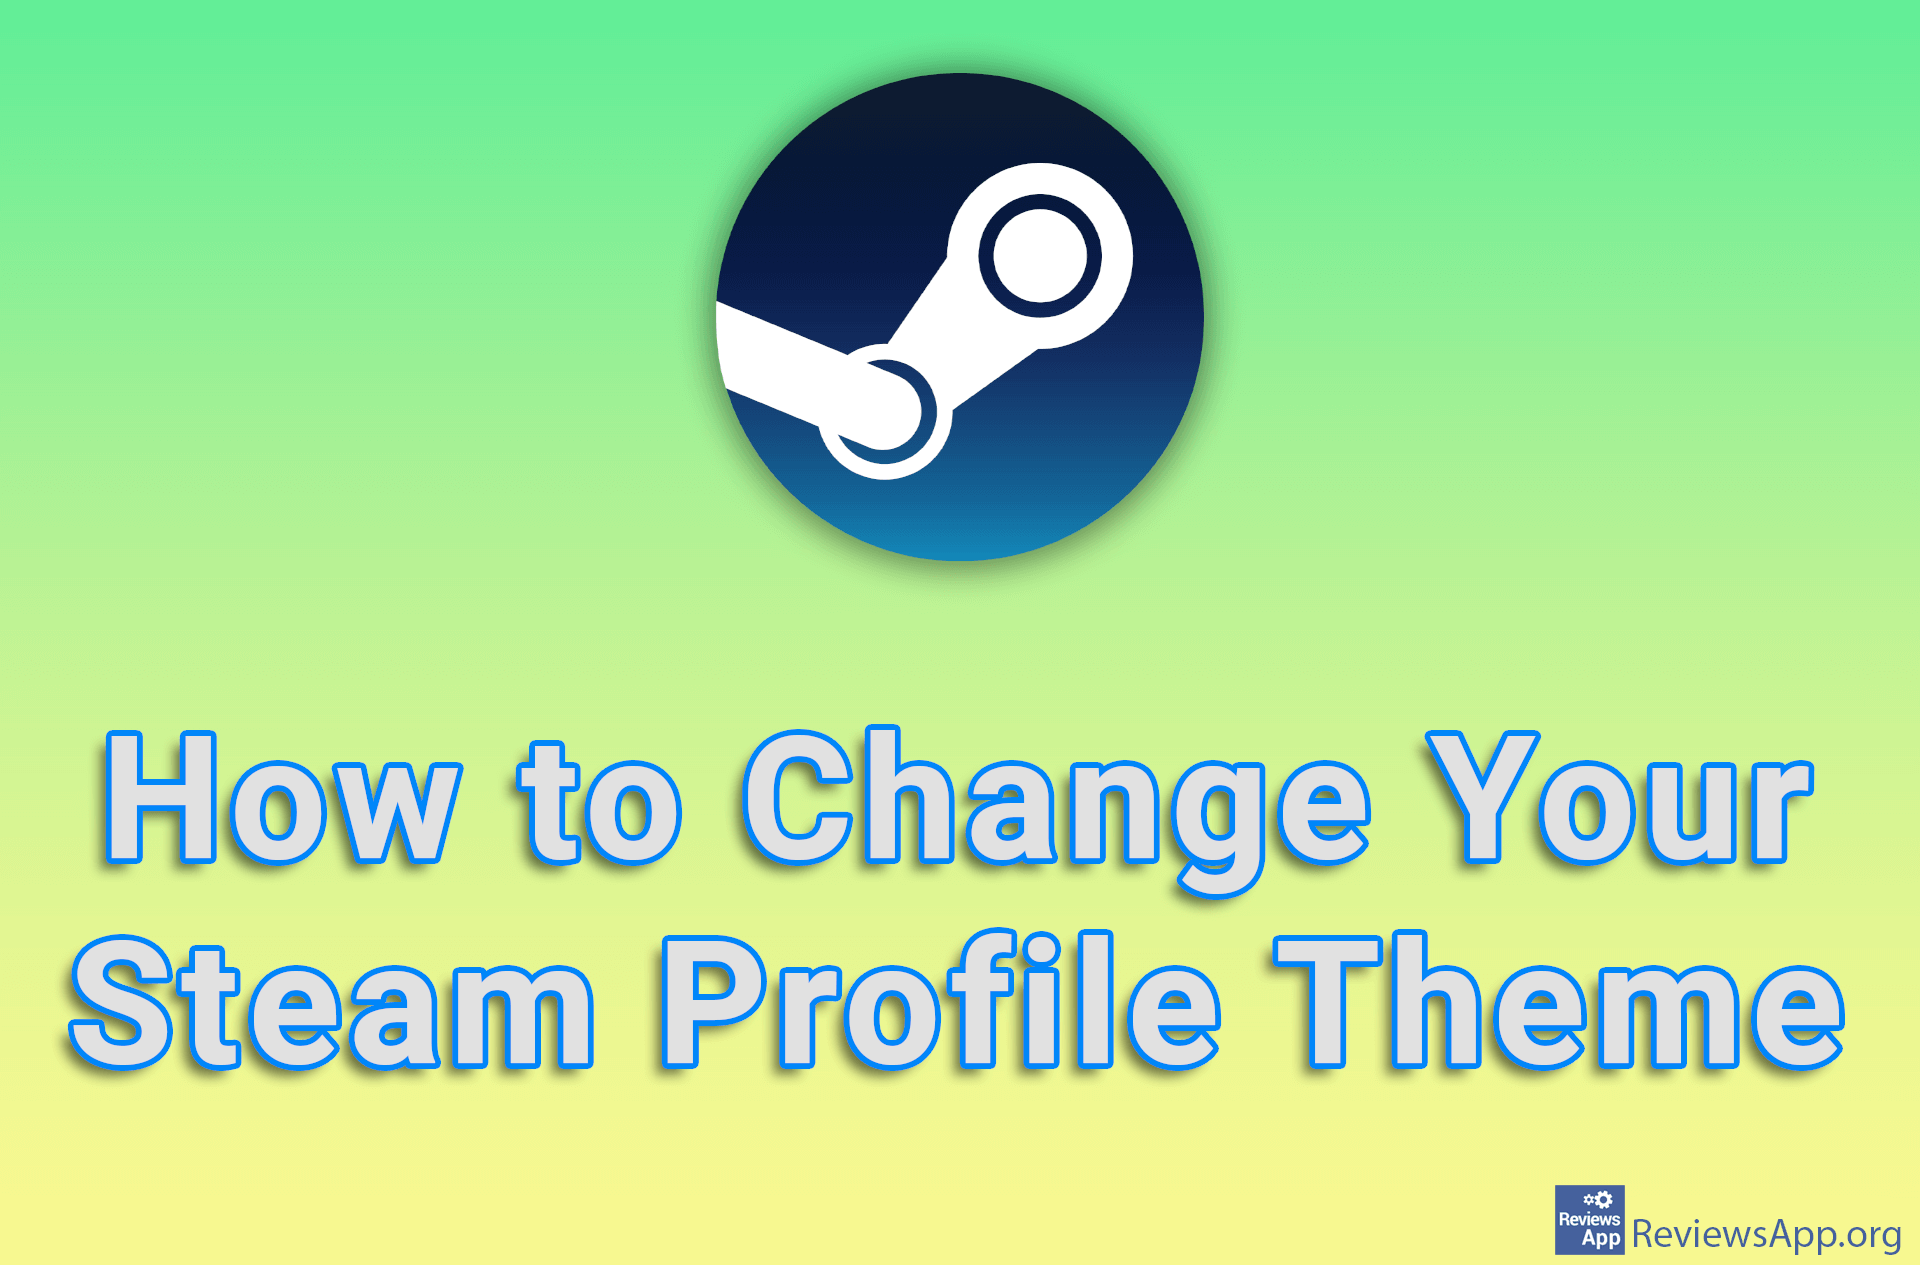 How to Change Your Steam Profile Theme